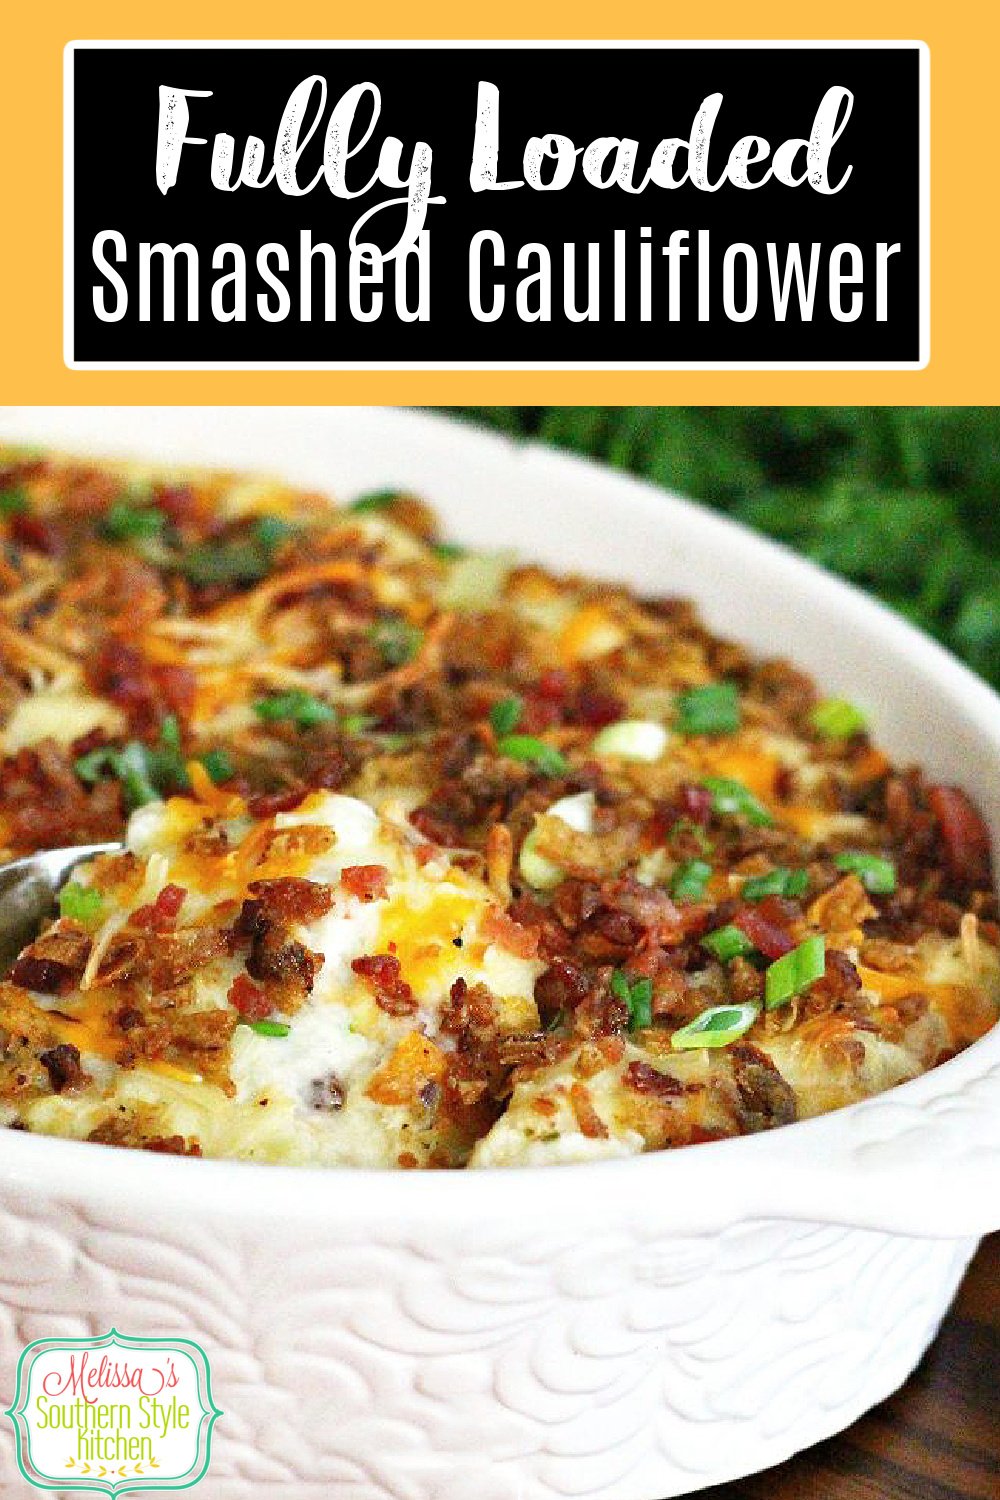 This rich and decadent Fully Loaded Smashed Cauliflower is the perfect side dish for any meal #loadedcauliflower #smashedcauliflower #cauliflowerrecipes #lowcarb #glutenfree #sidedishrecipes #bacon #cauliflowercasserole #casseroles #dinner #dinnerideas #southernfood #southernstylerecipes